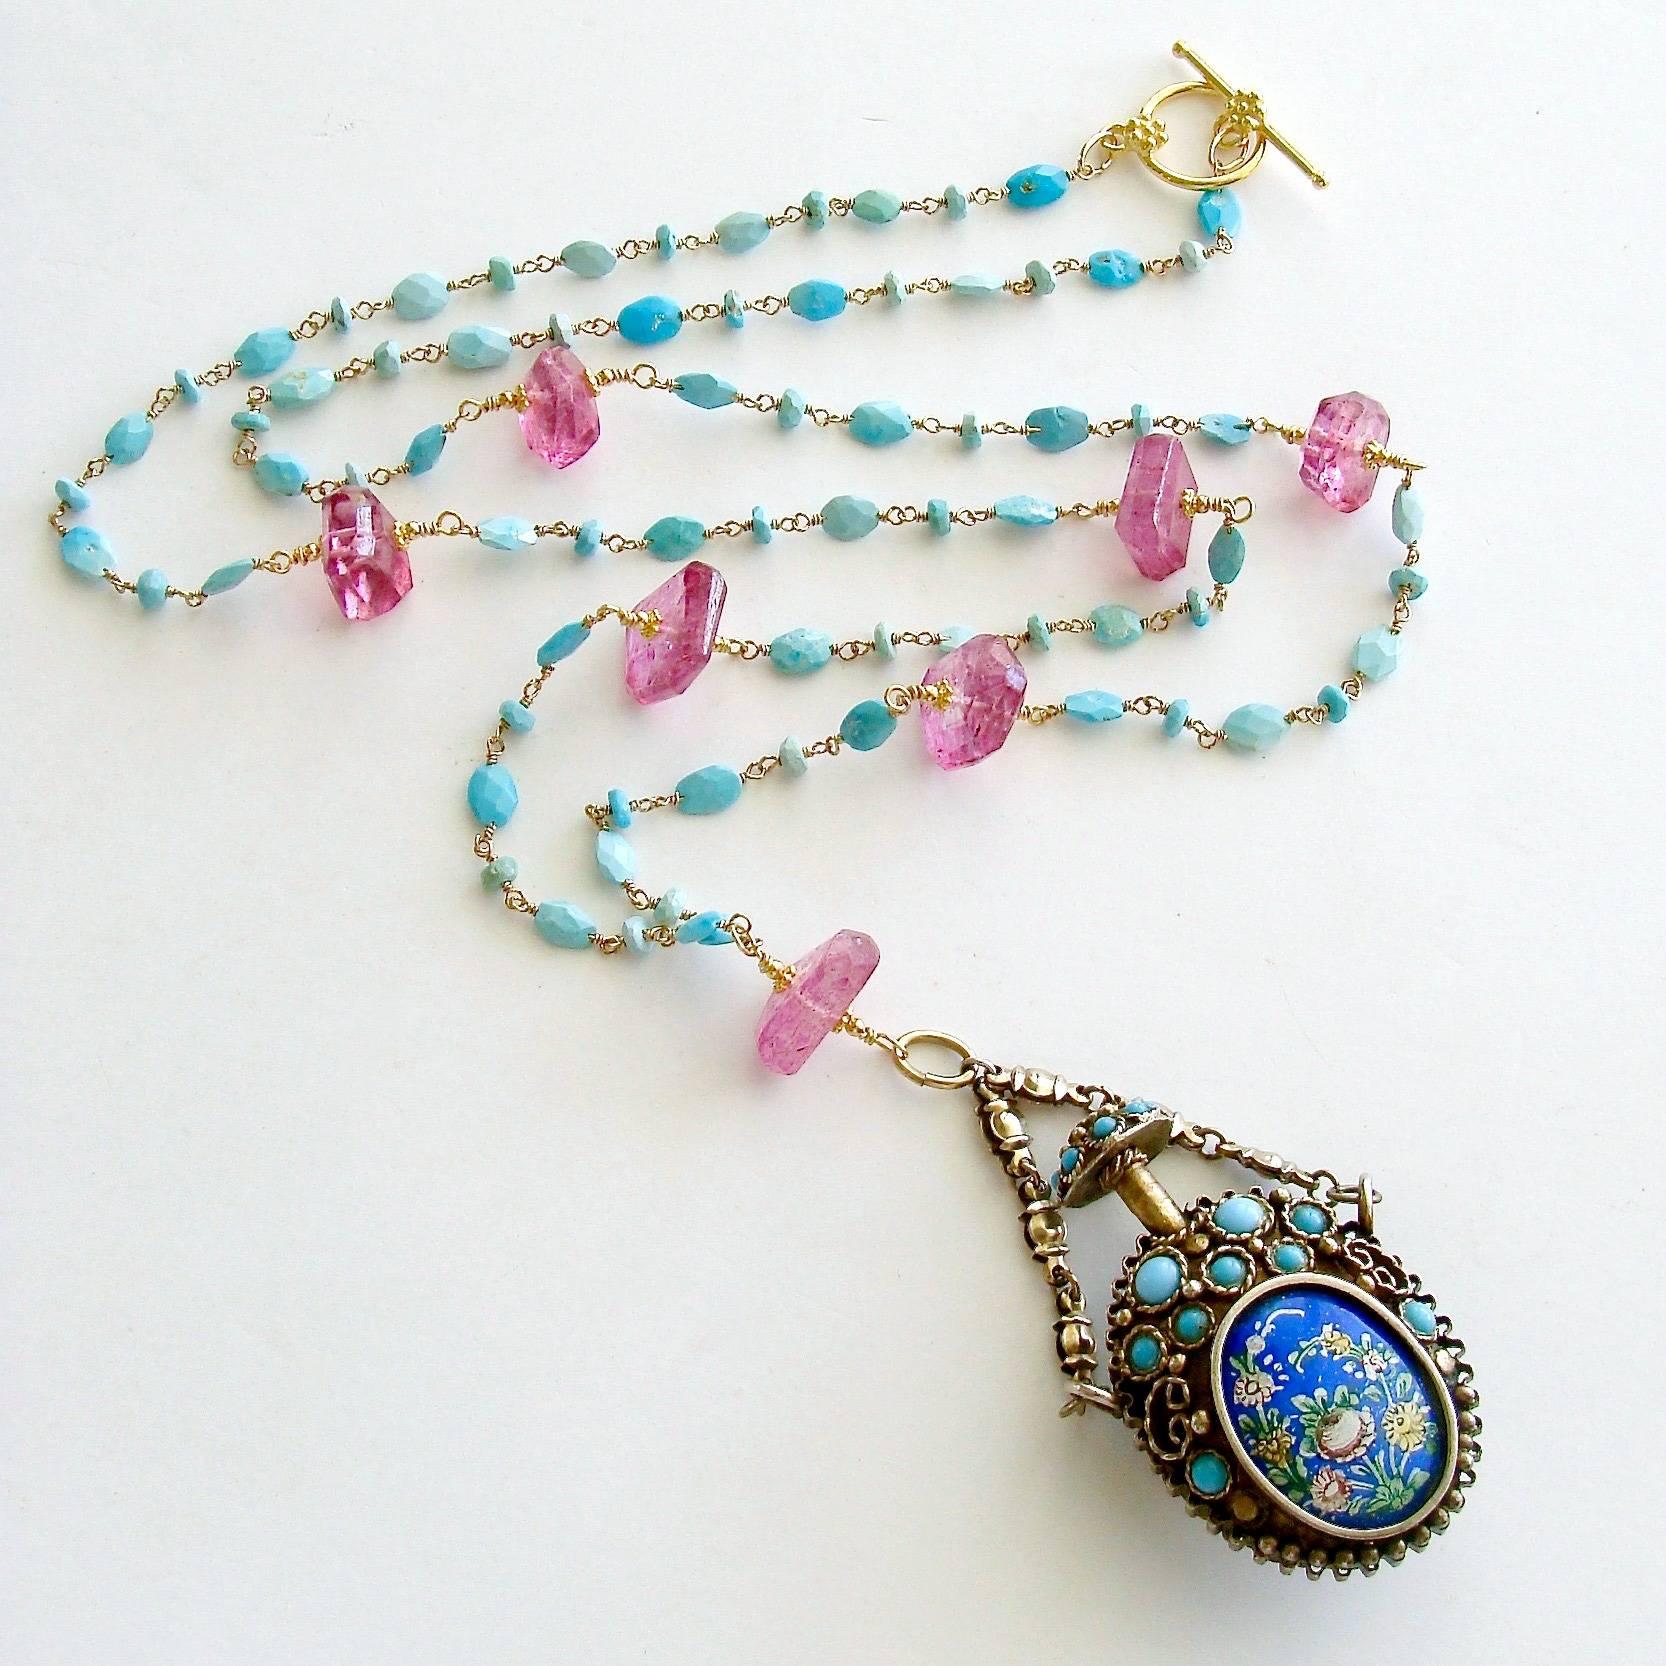 Turquoise Austro Hungarian Chatelaine Cloisonné Scent Bottle Necklace Turquoise Pink Topaz Nuggets - Ainsley Necklace.

A delicate hand linked chain of dainty Sleeping Beauty Turquoise ovals and rondelles has been intercepted with brilliant